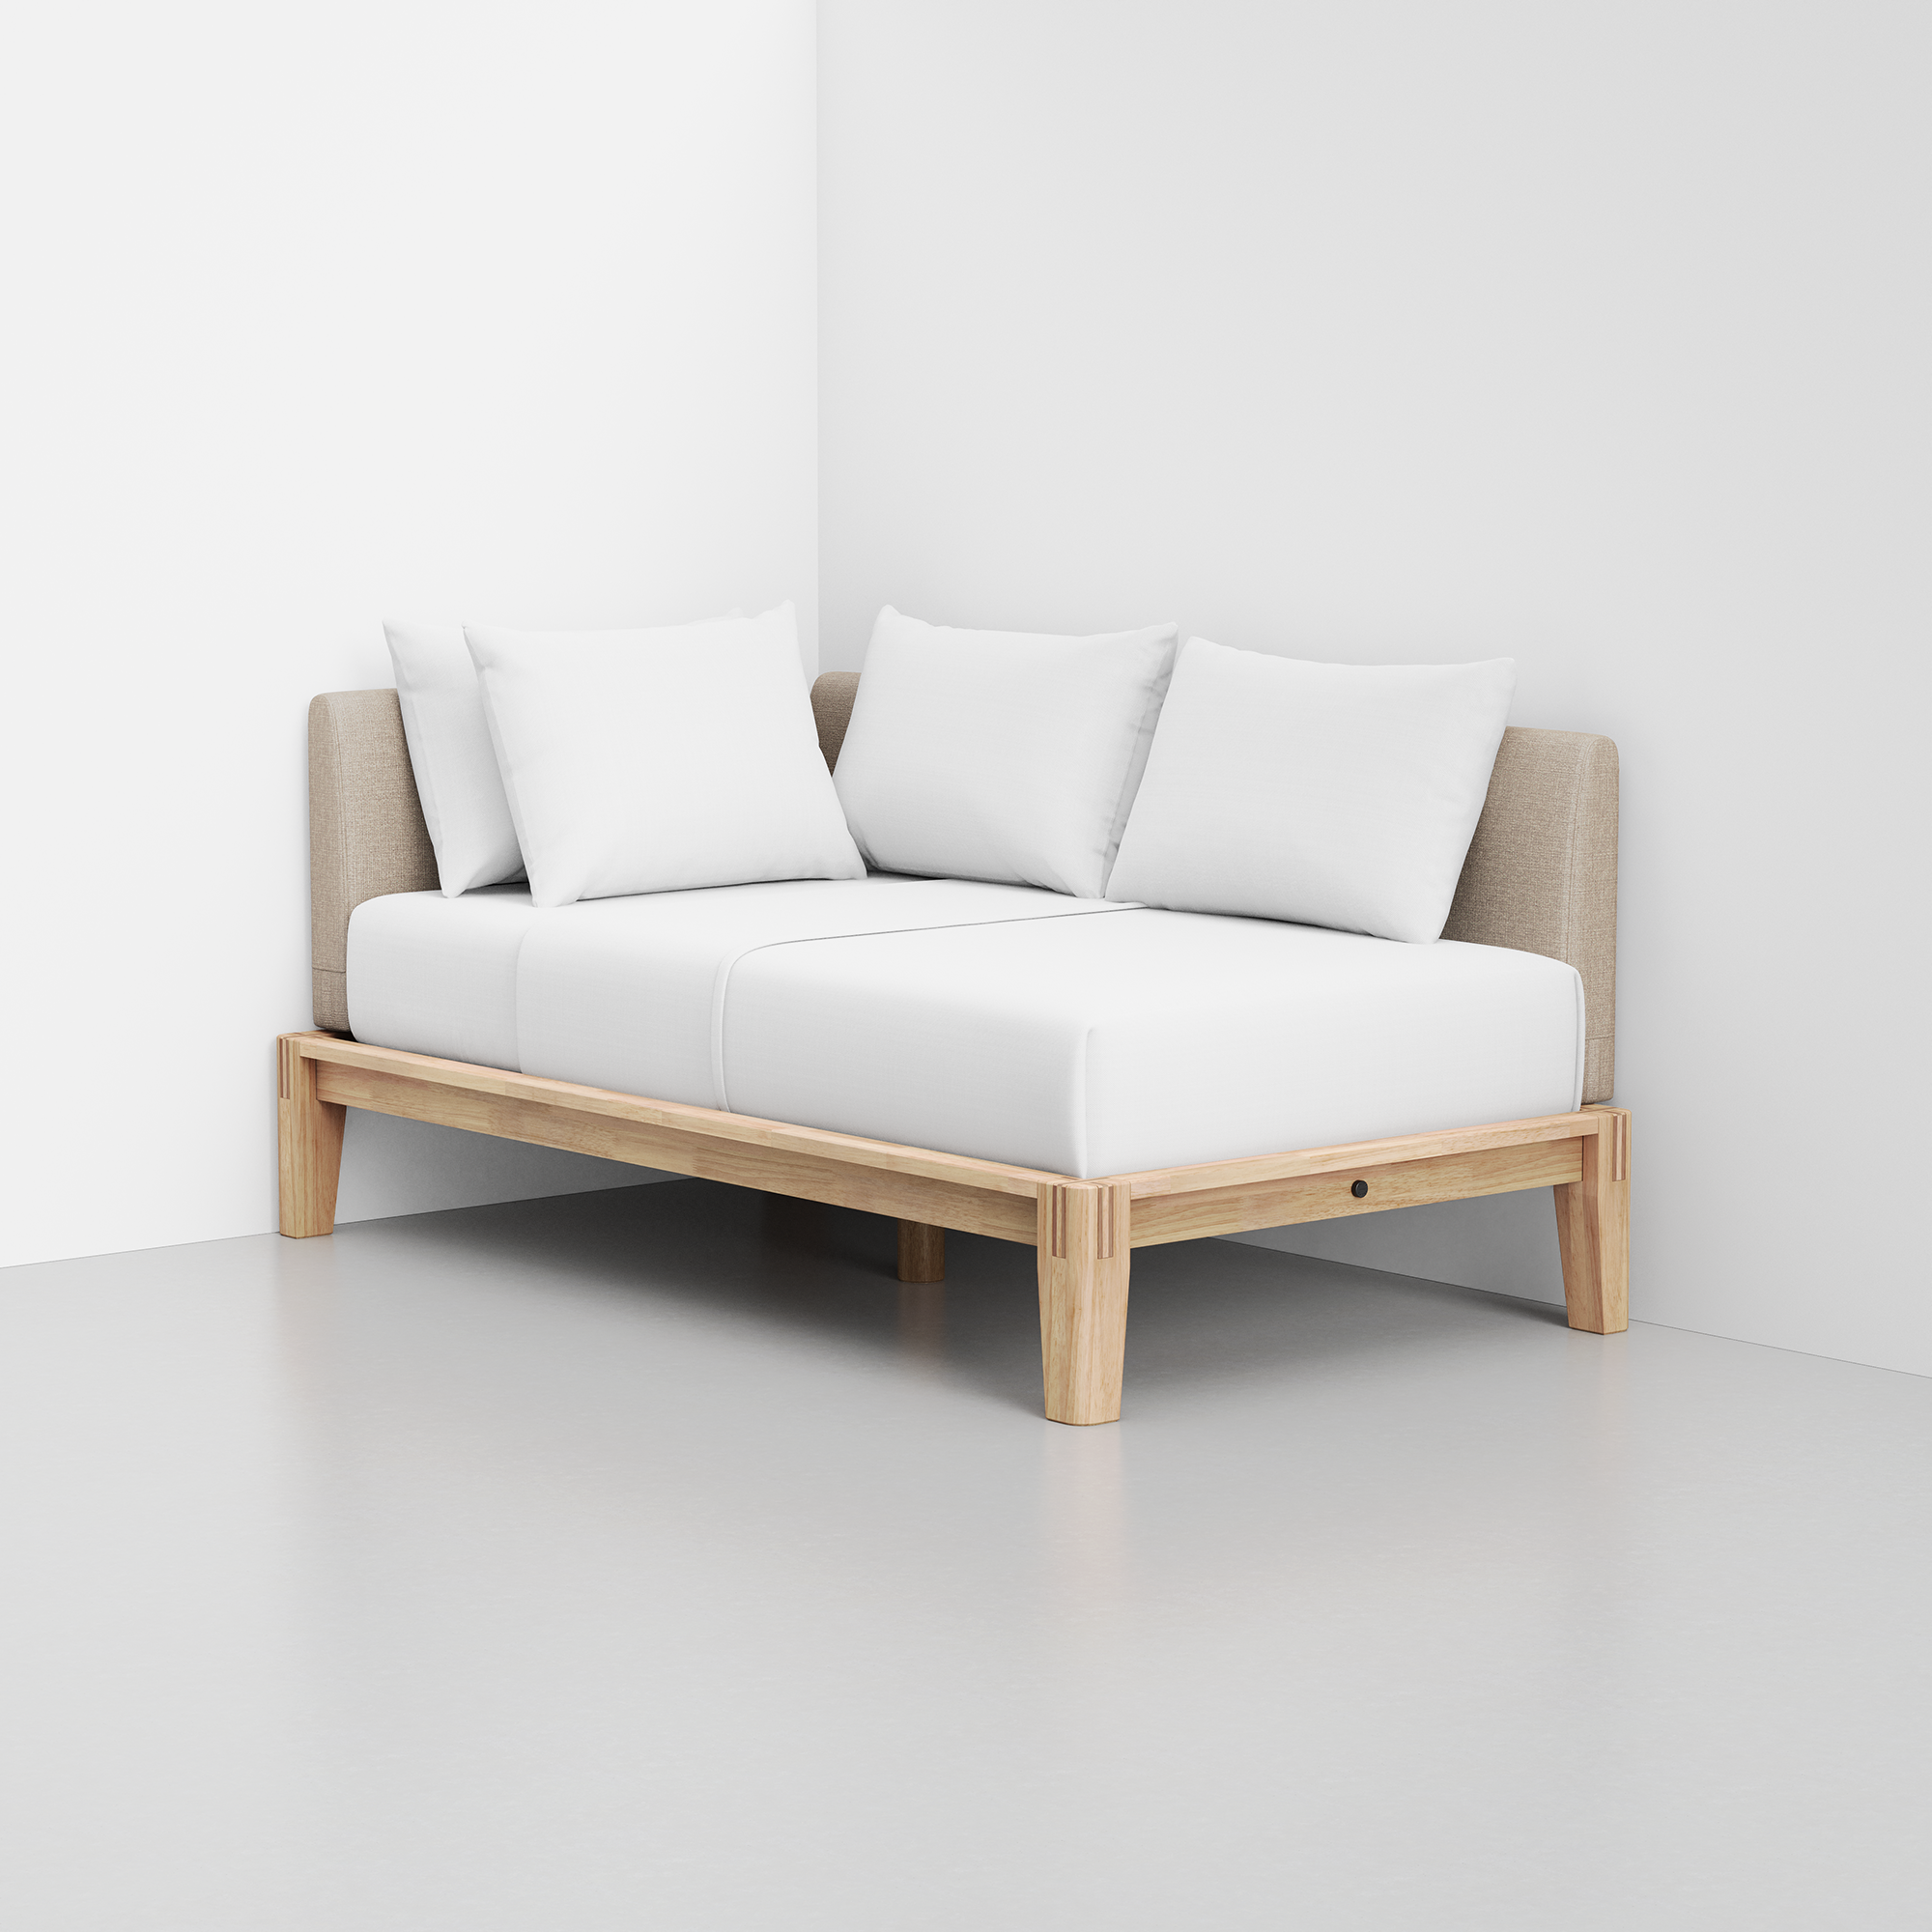 PDP Image: The Daybed (Natural / Dune) - Rendering - Pillows